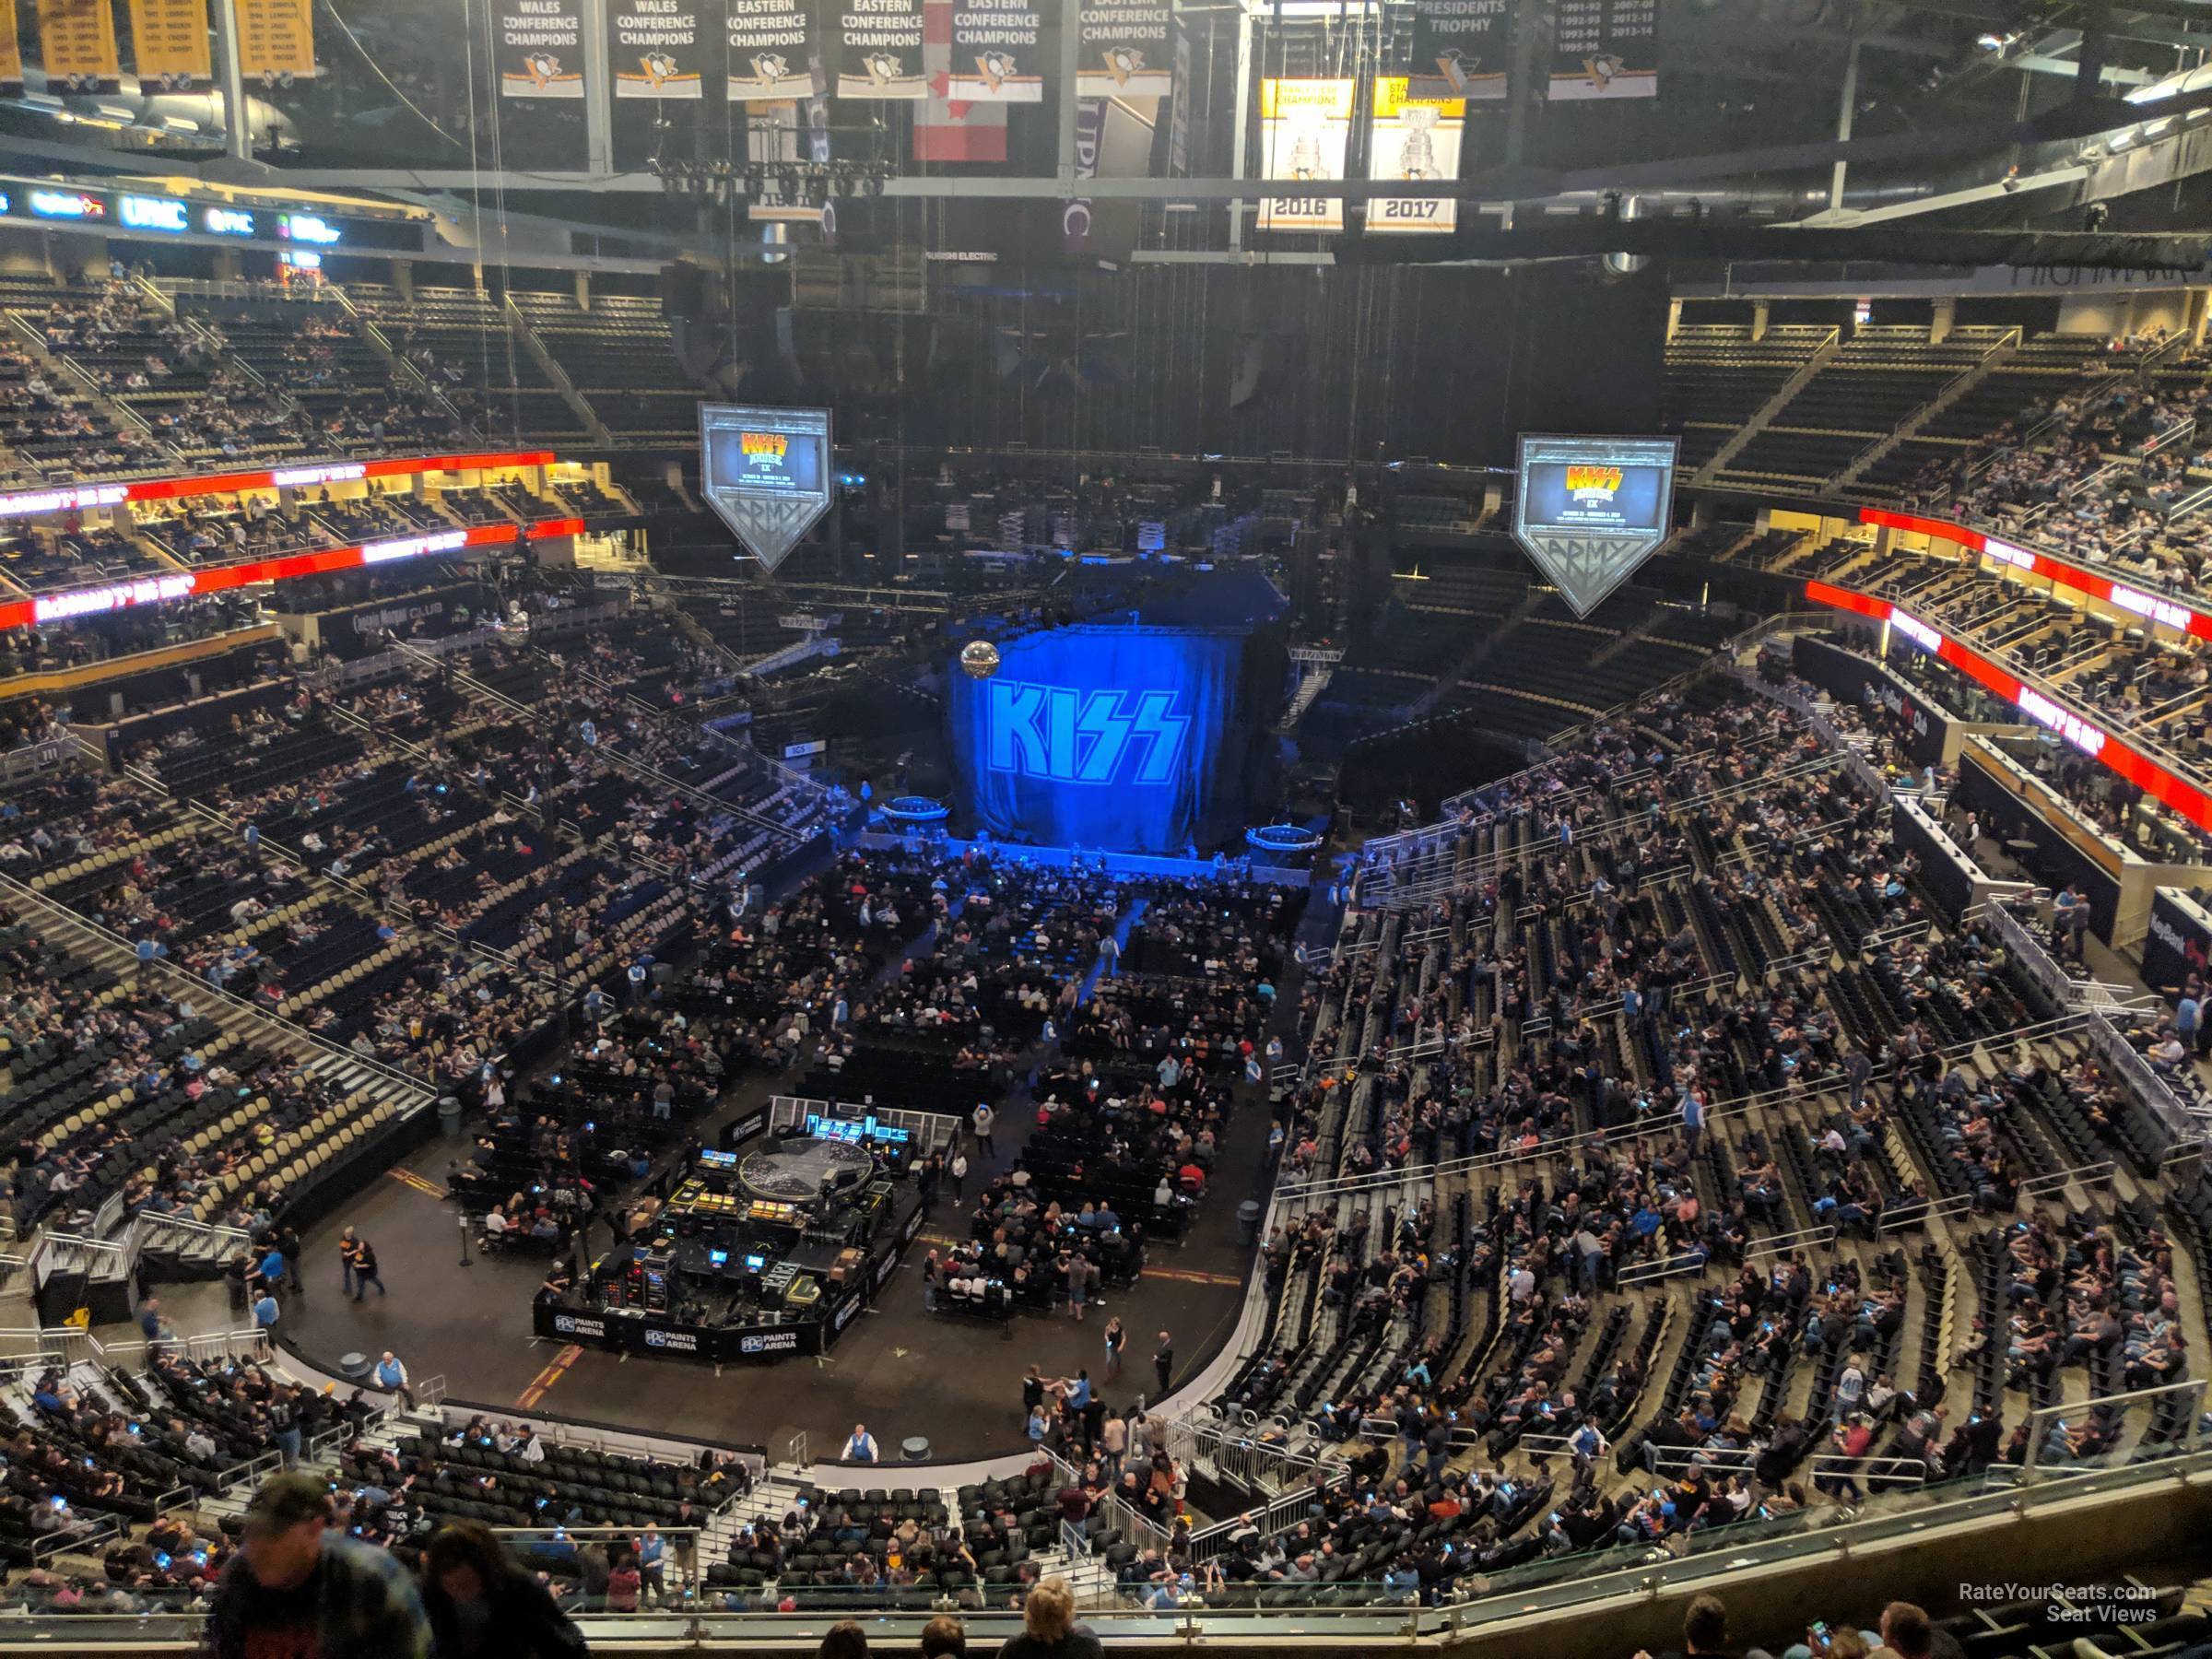 section 209, row l seat view  for concert - ppg paints arena